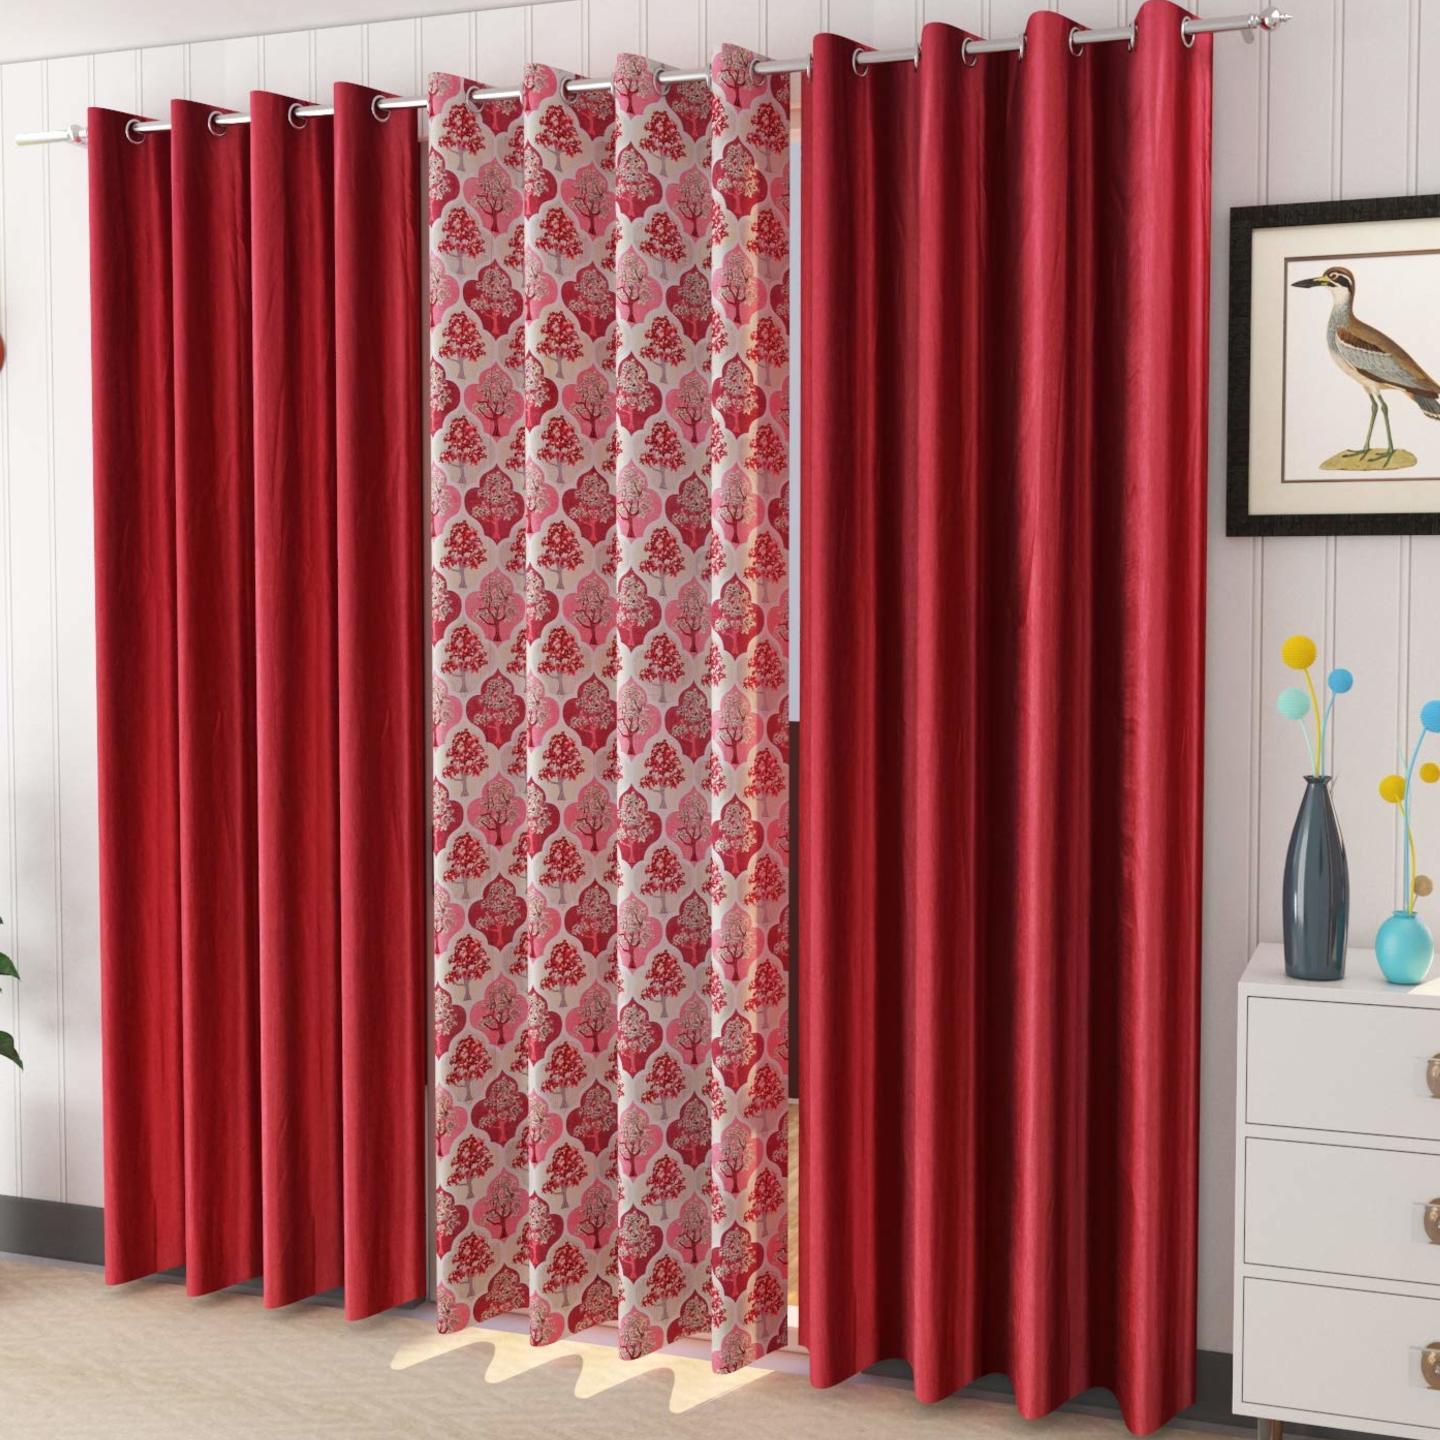 Handtex Home Curtains Polyester Tree Printed Set of 3 Pcs Maroon (1Tree+2Plain) Size for Long Door 4 Feet x 9 Feet